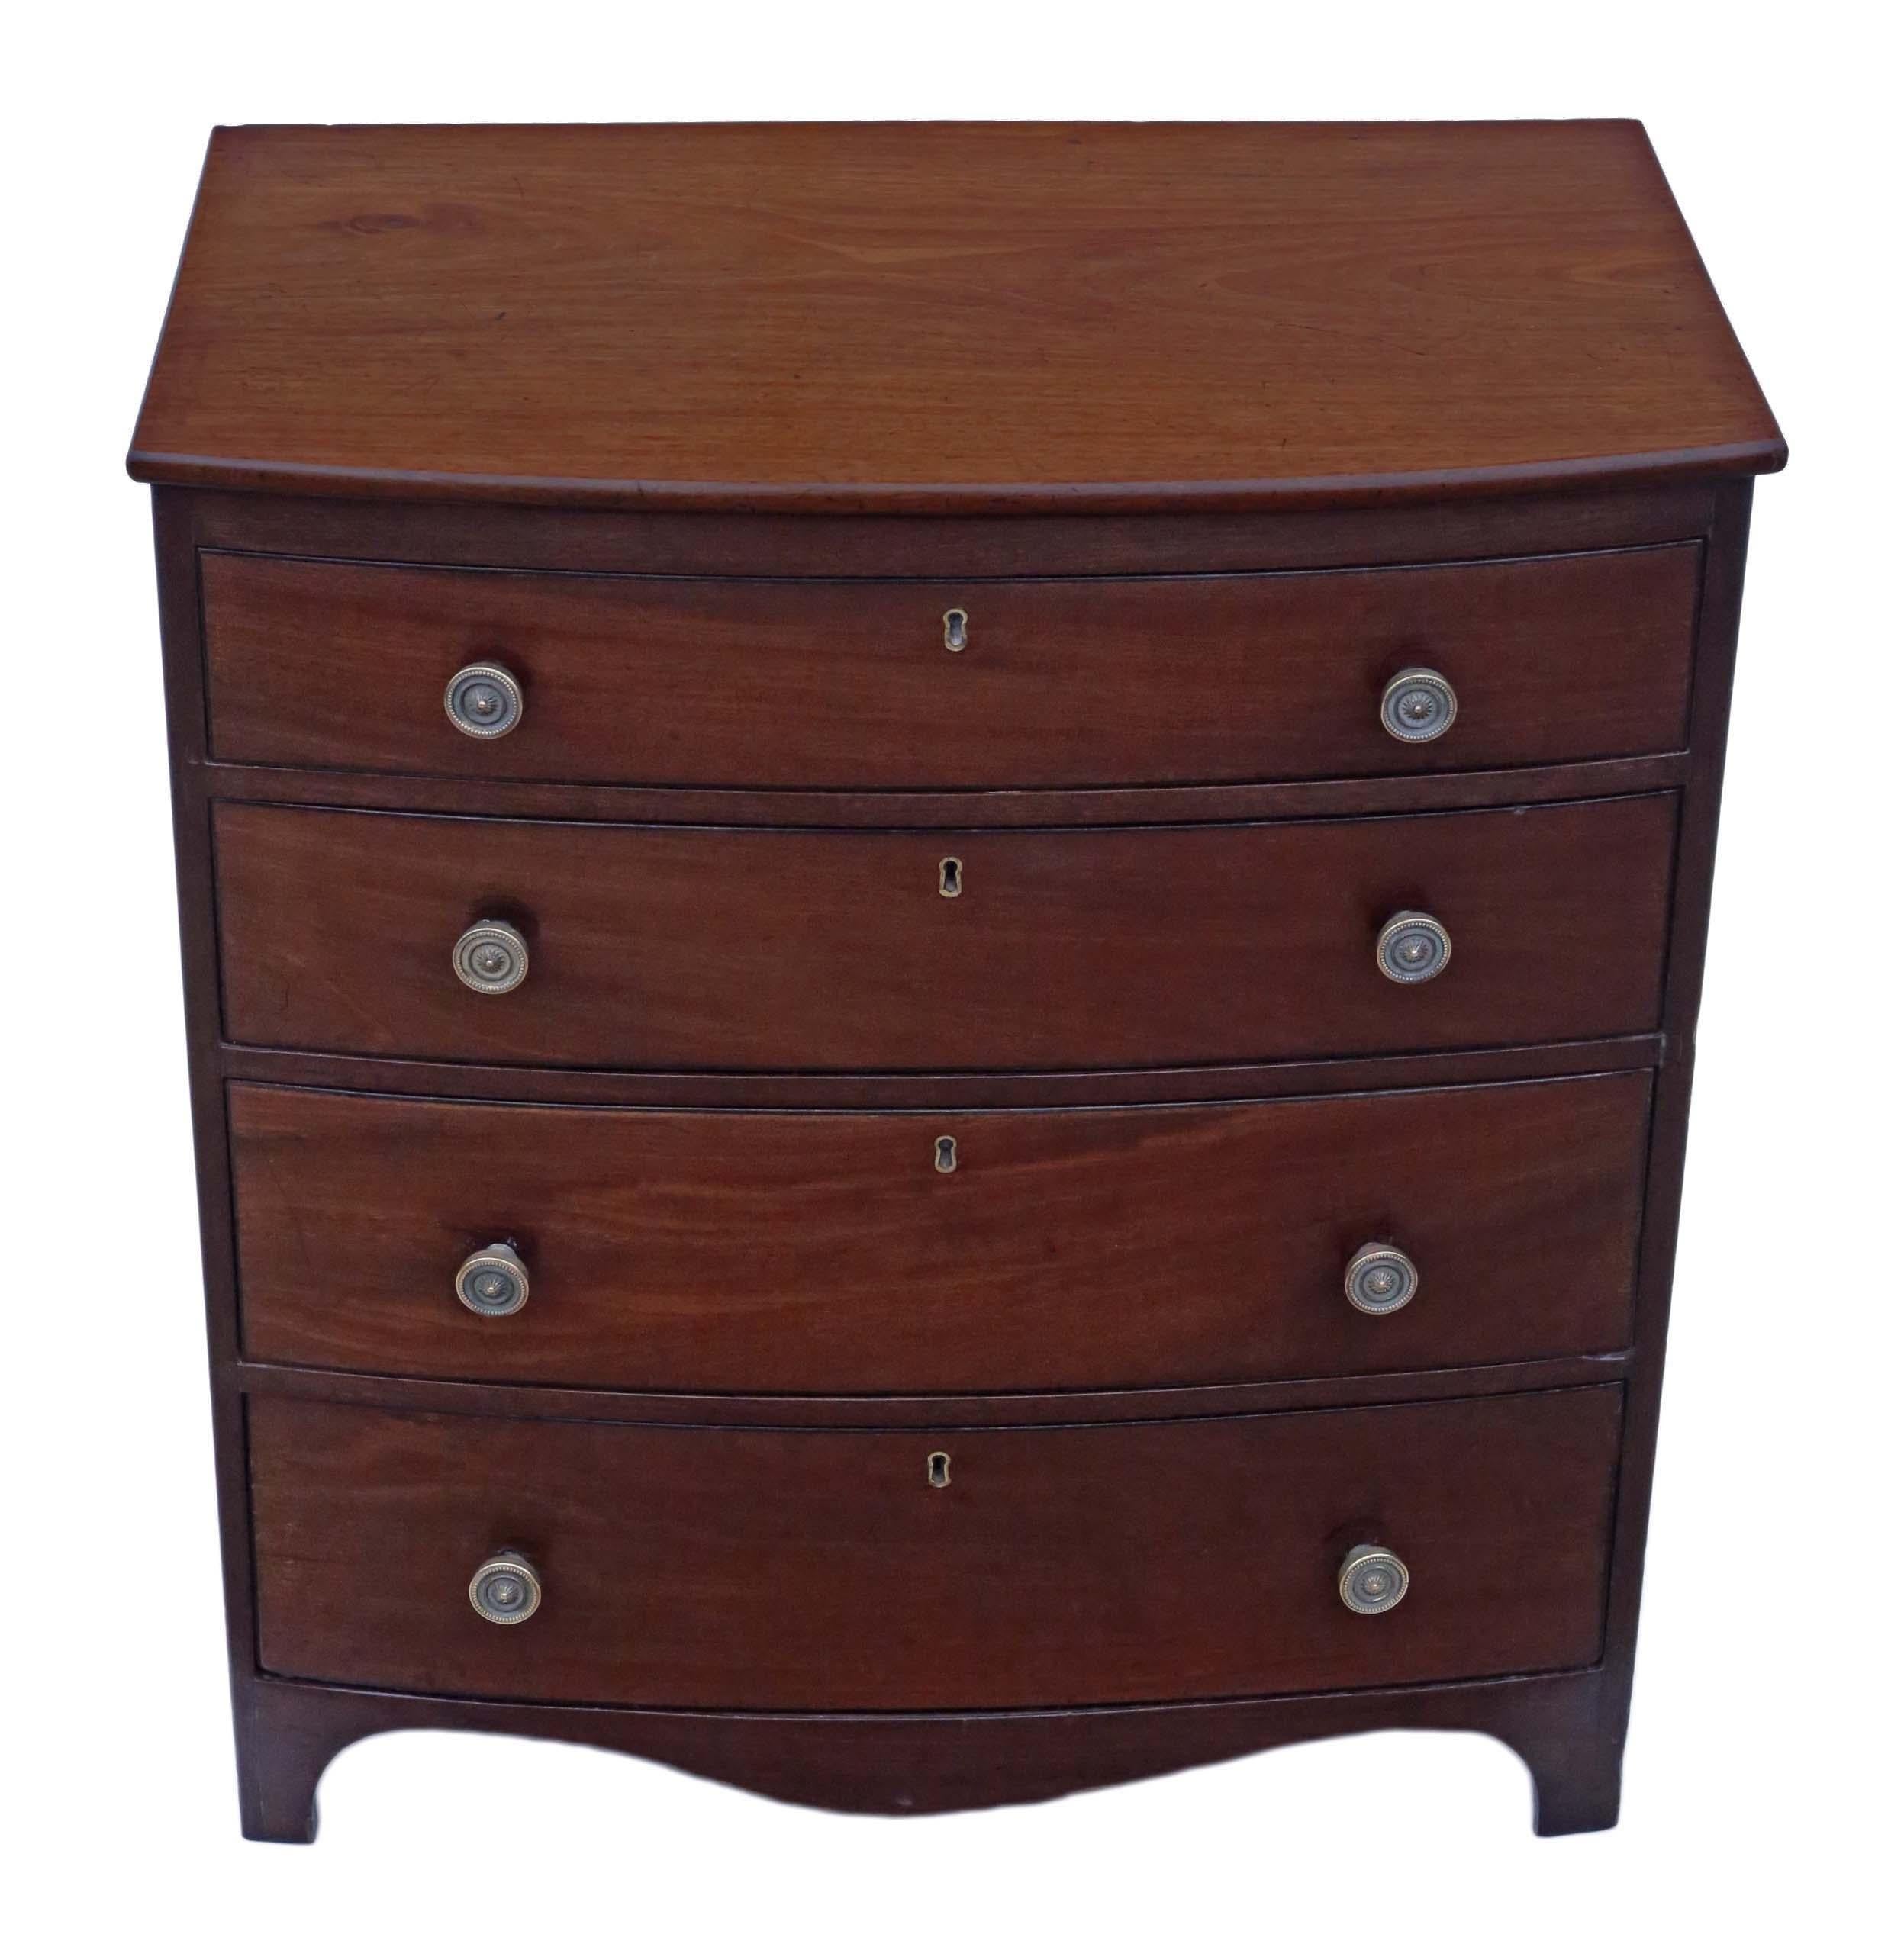 Antique quality small Georgian 19th century mahogany bow front chest of drawers C1820. Lovely compact proportions.

Great rare item, which has no loose joints.

Good age, colour and patina. The drawers slide freely.

Measures: 68W x 42cmD